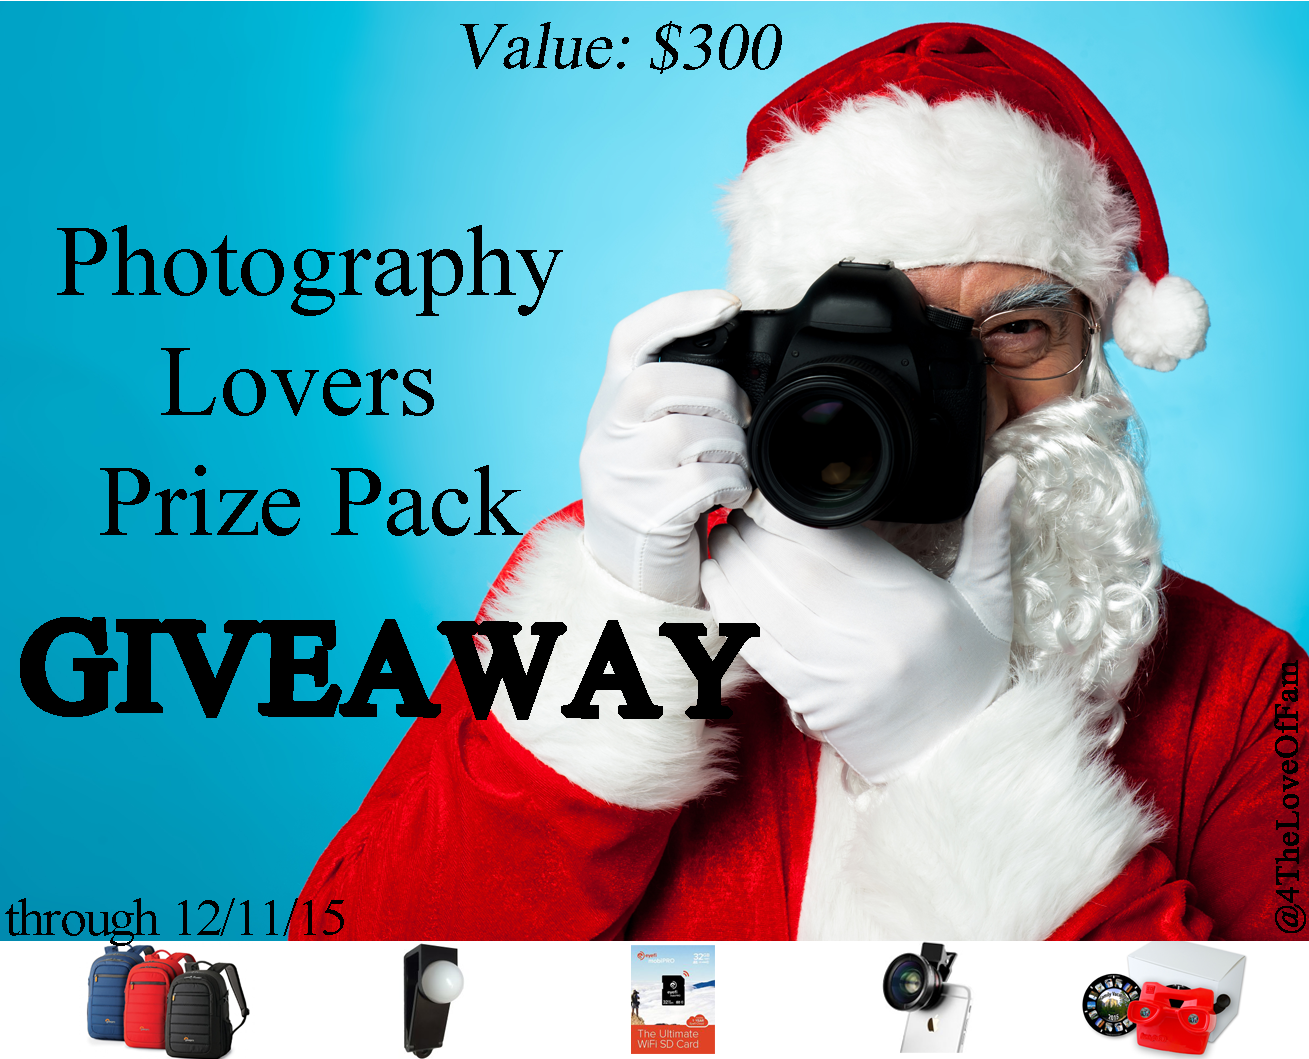 WIN A Photography Lovers' Prize Pack valued at over $300!!! Top Gifts for Photography Lovers Under $100 - A Photographer Holiday Gift Guide